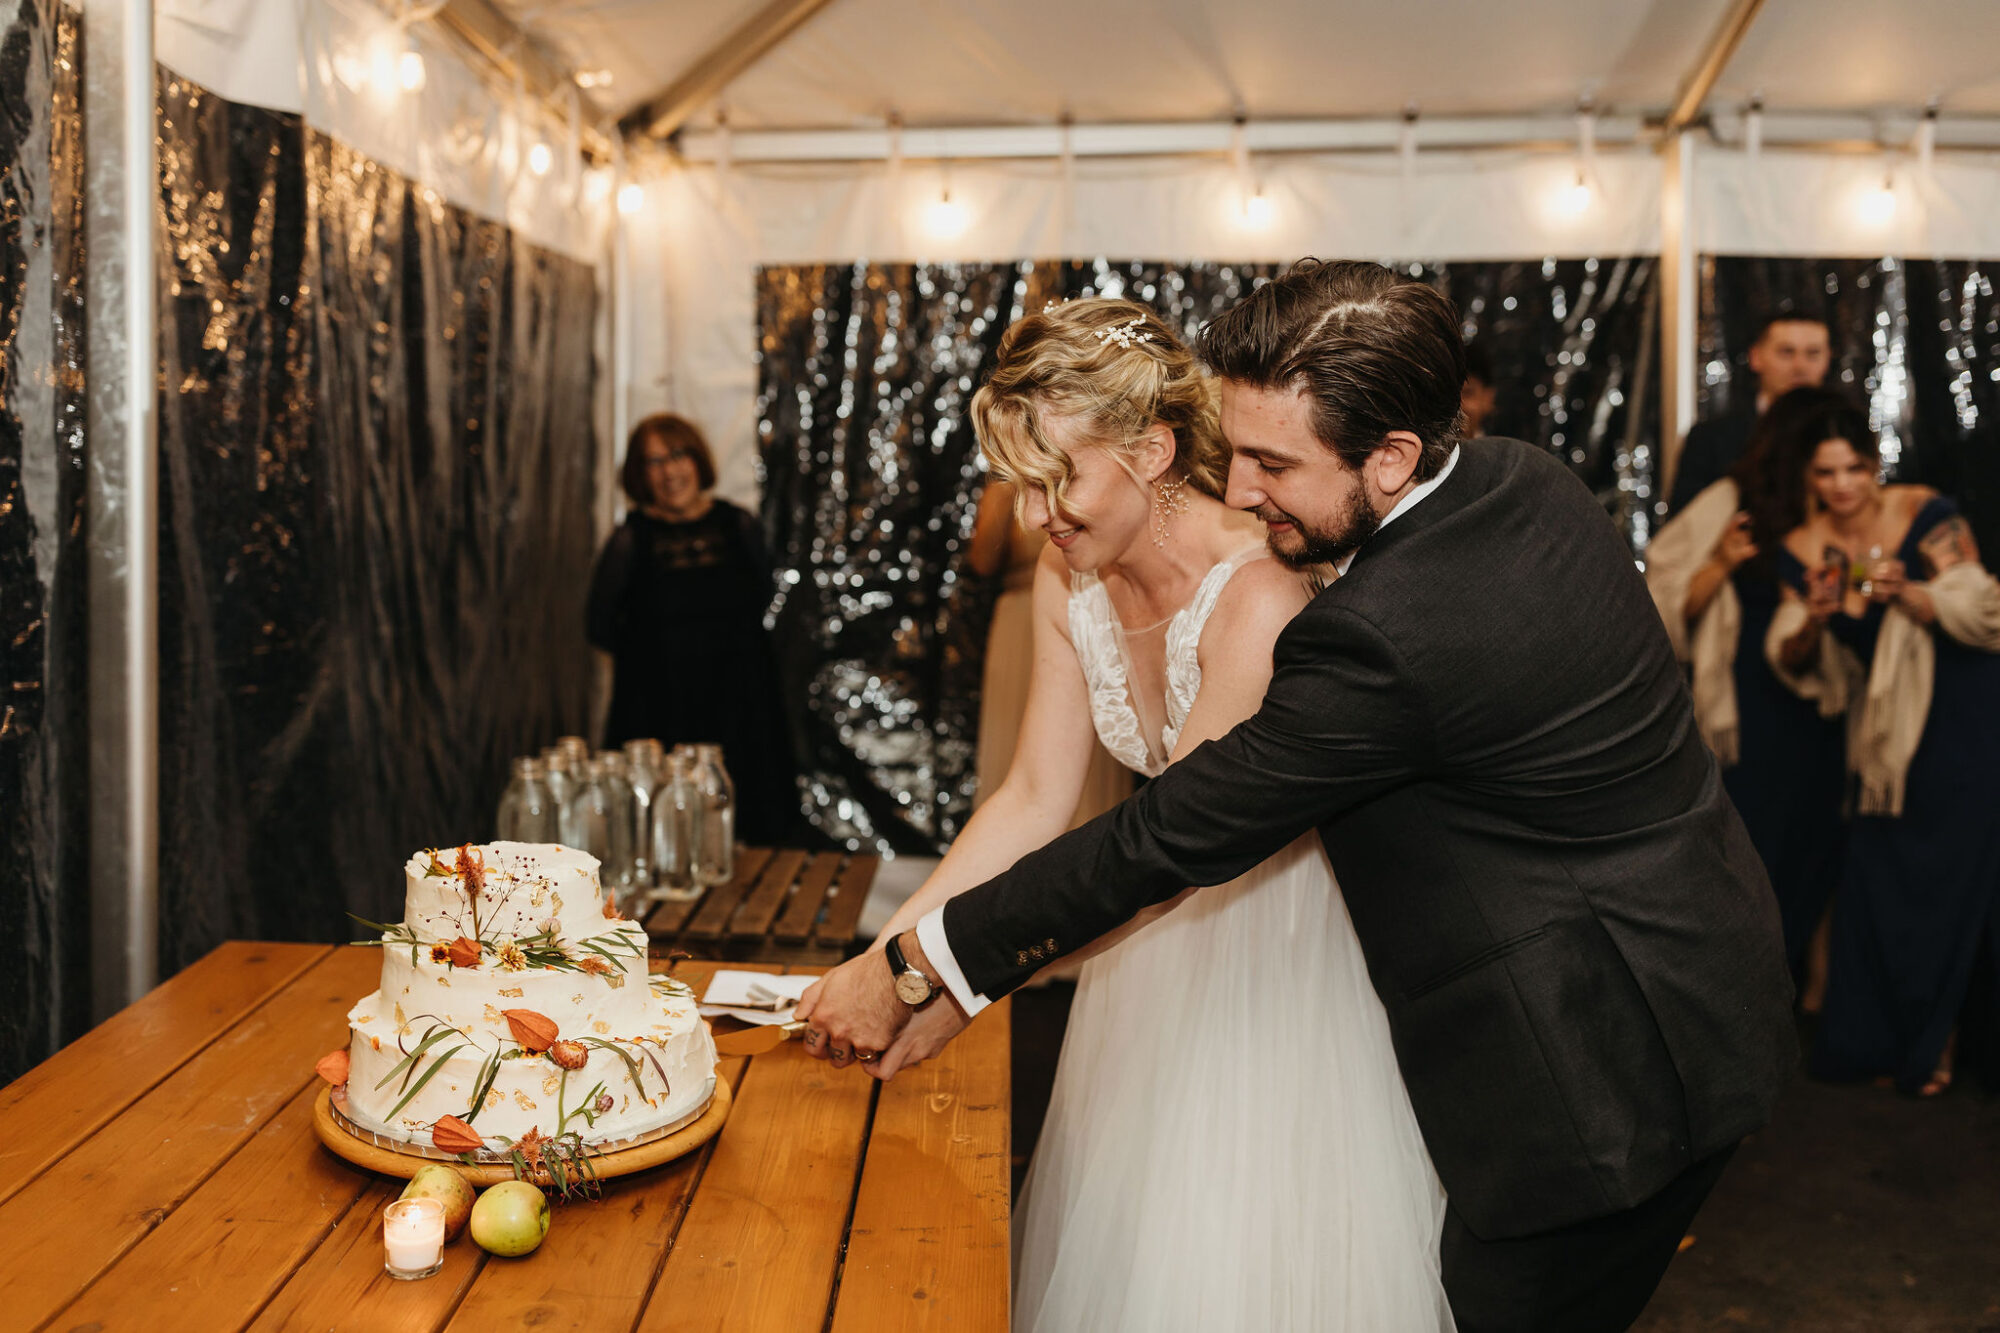 foxfire mountain house, catskill mountains, wedding, fall, fall florals, clear tent, reception, cake cutting